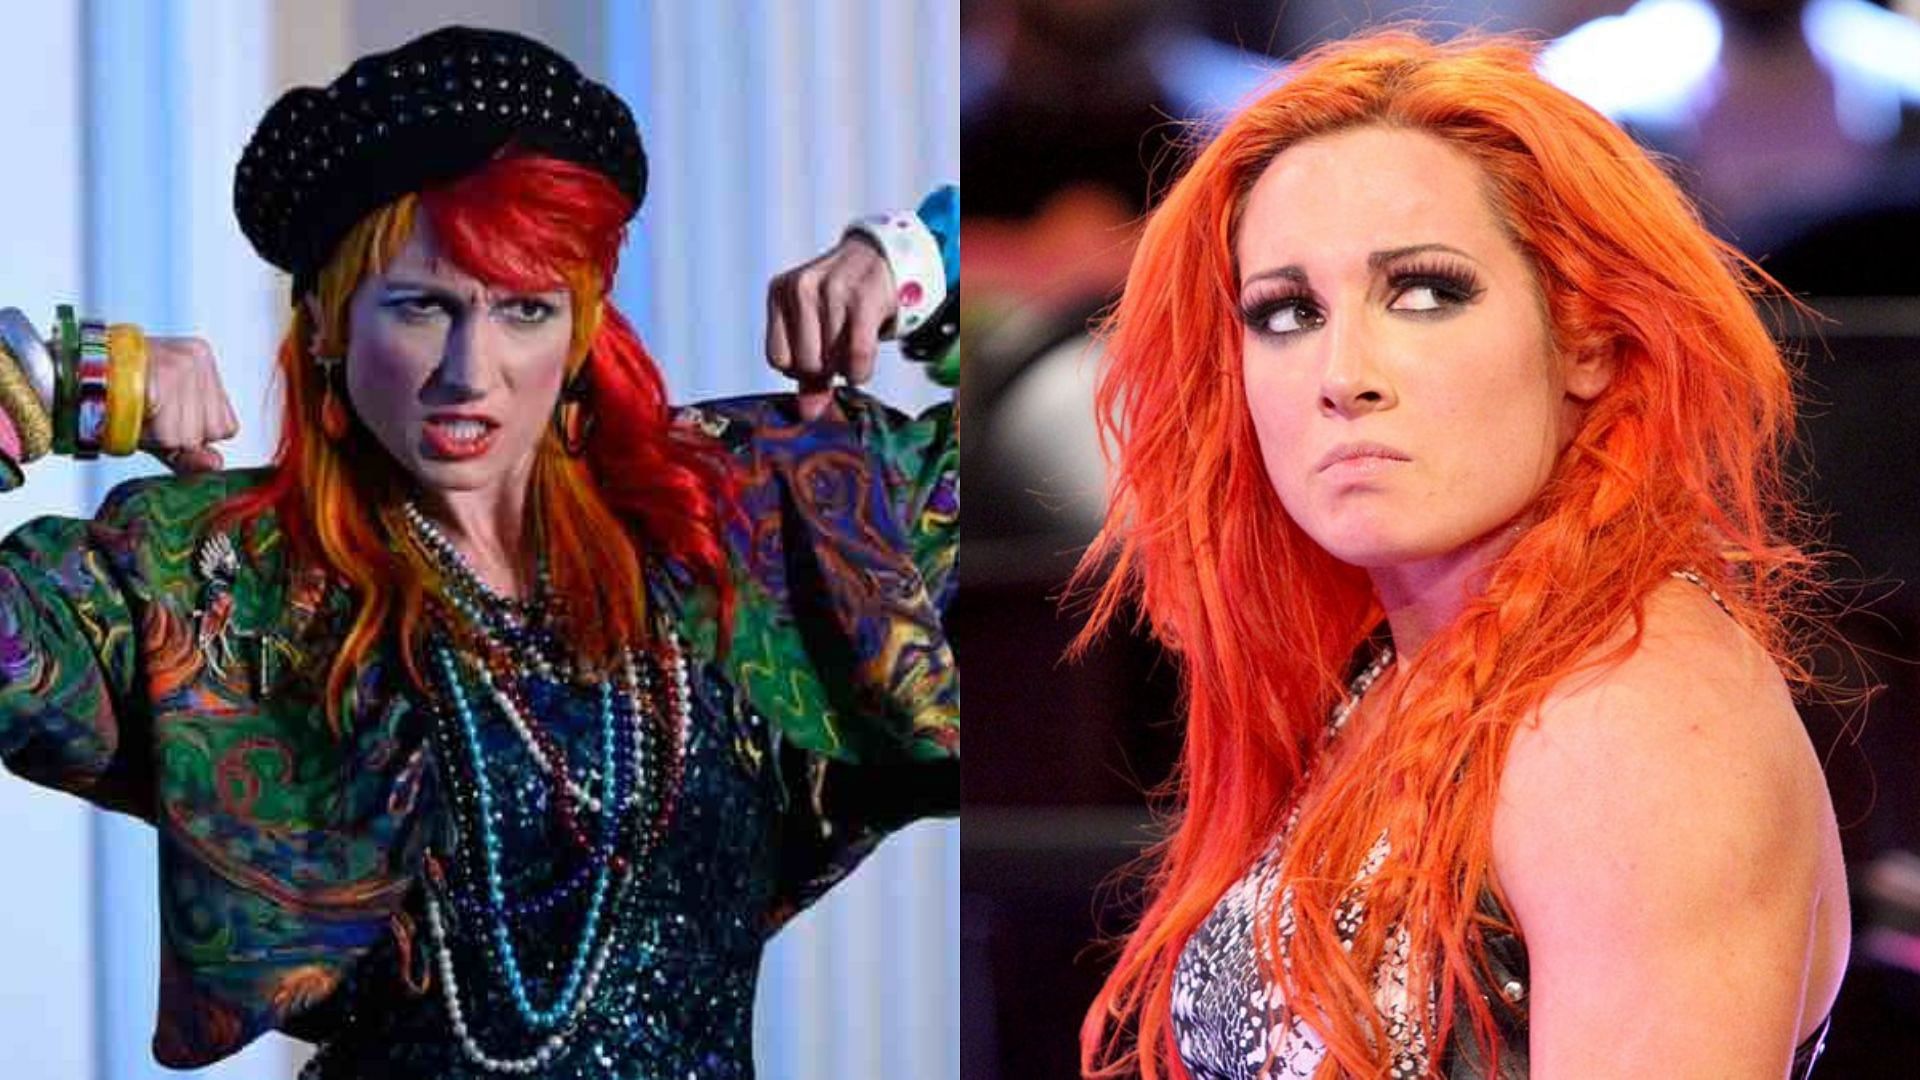 Becky Lynch Young Rock: Will Becky Lynch miss WWE RAW due to Young